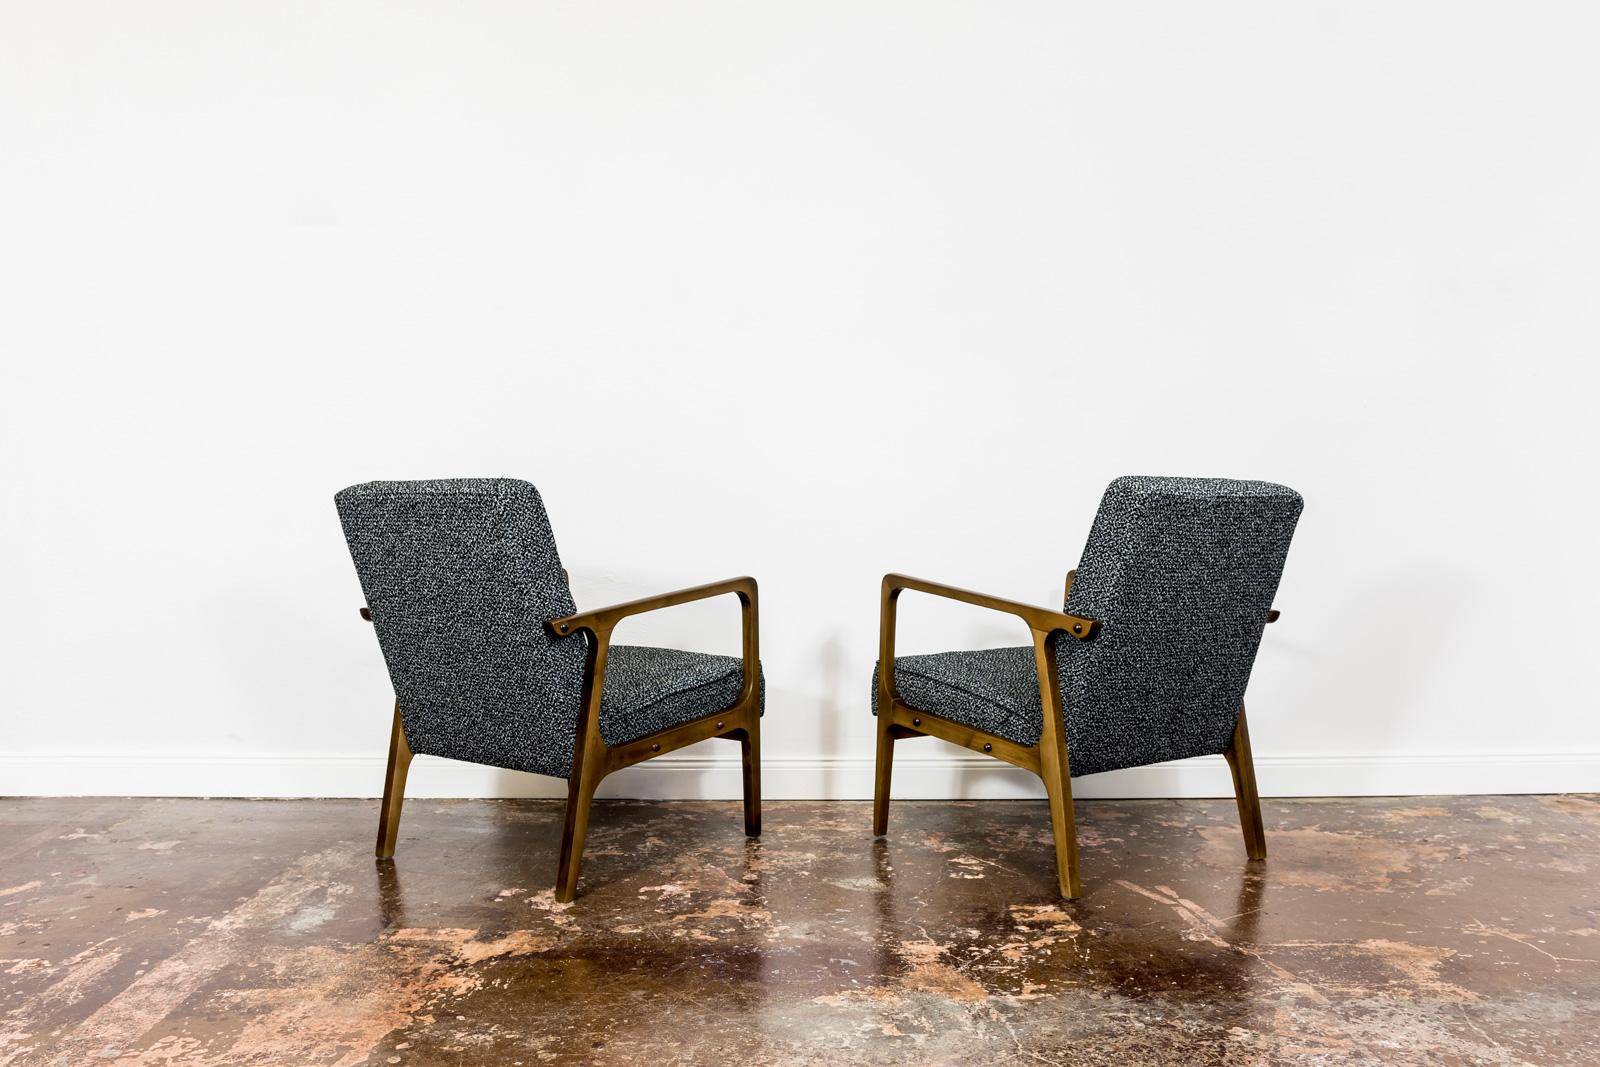 20th Century Pair Of Mid Century Armchairs Type 04-B From Bydgoskie Fabryki Mebli, 1960's For Sale